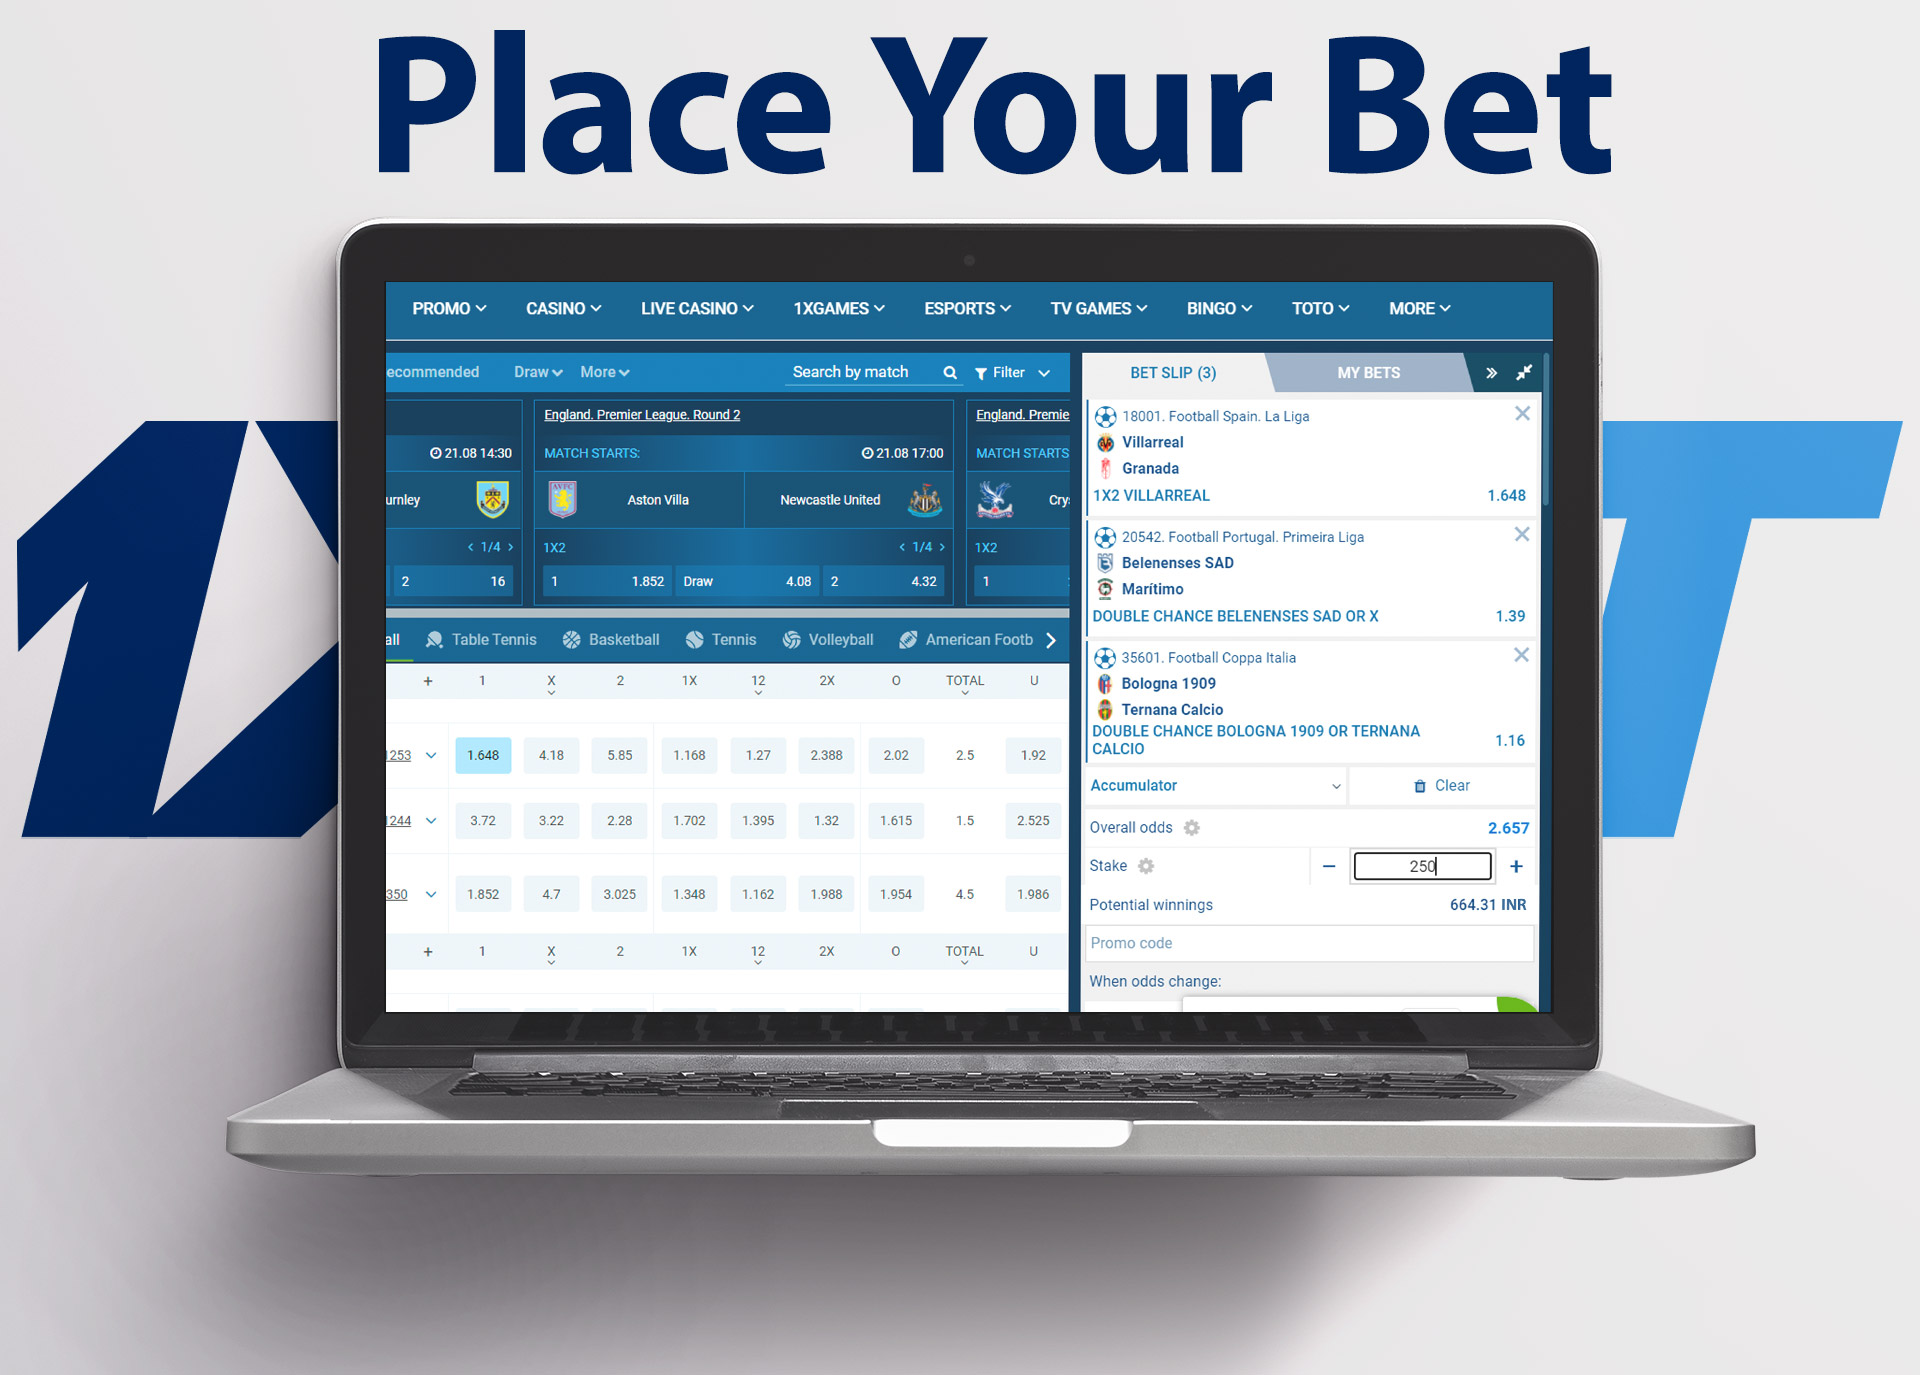 Choose a football event, specify the amount of your bet and place the bet.